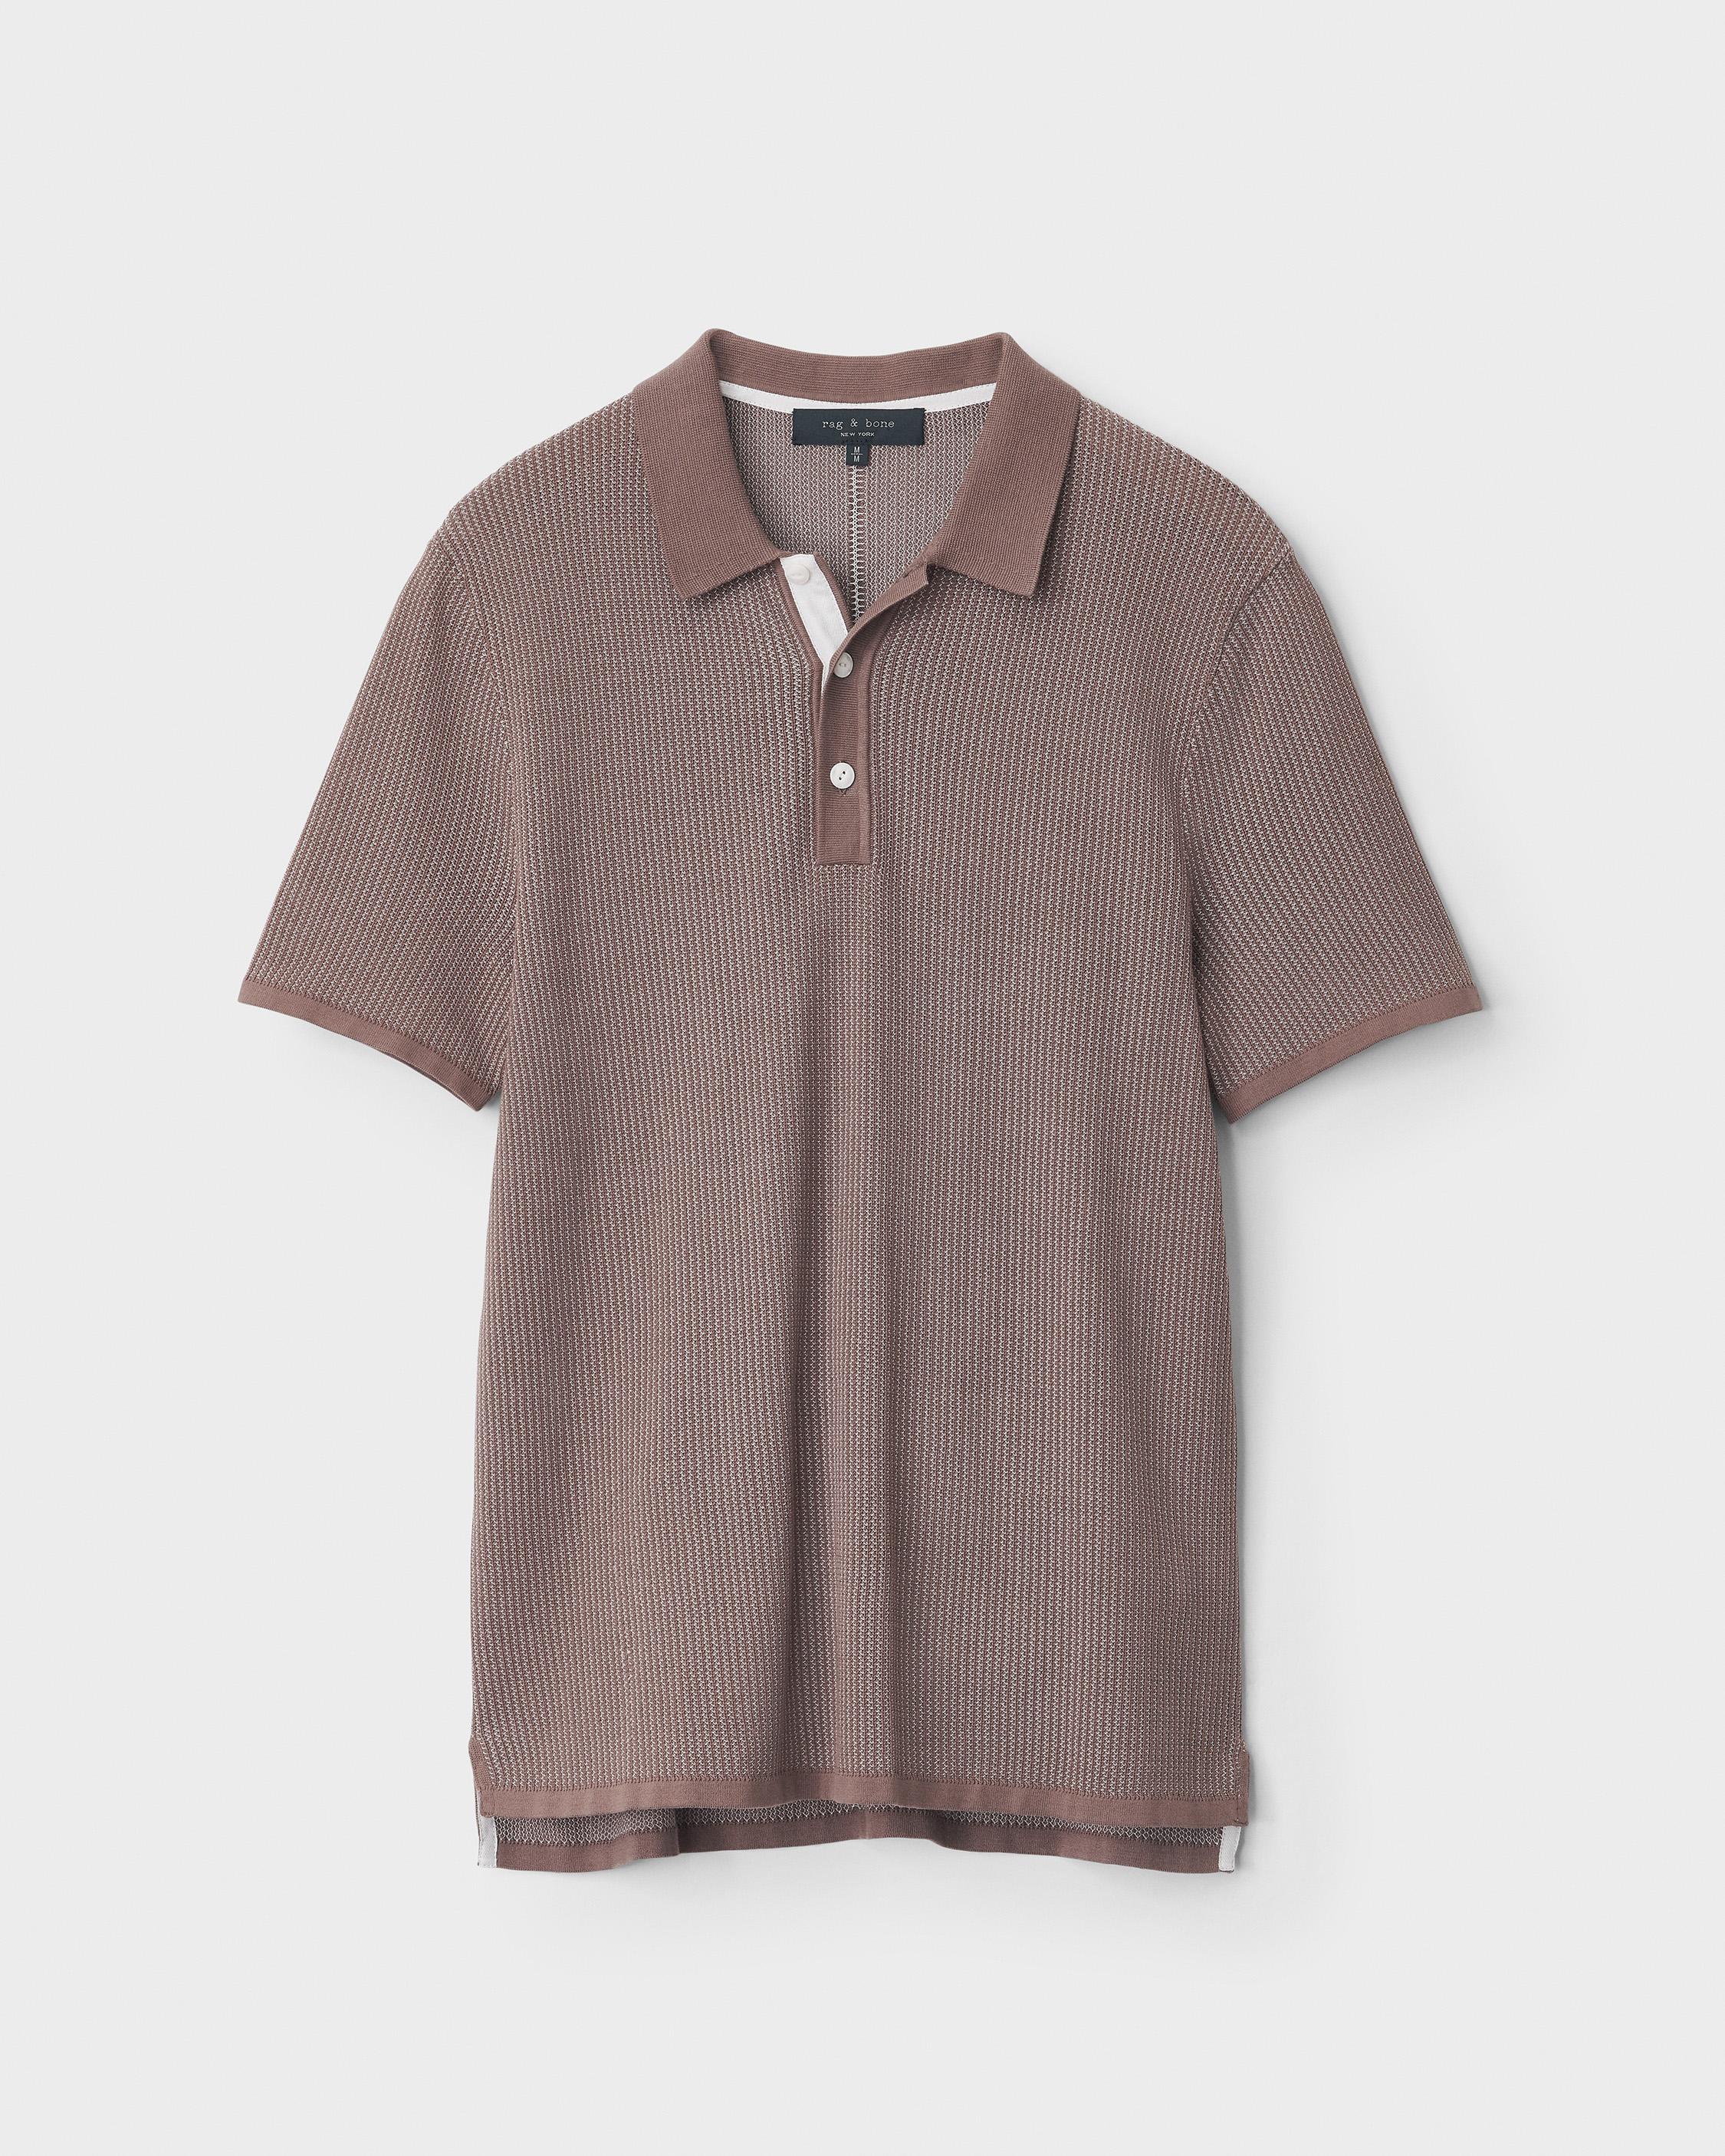 Shop Polo Shirts for Men In Various Styles | rag & bone